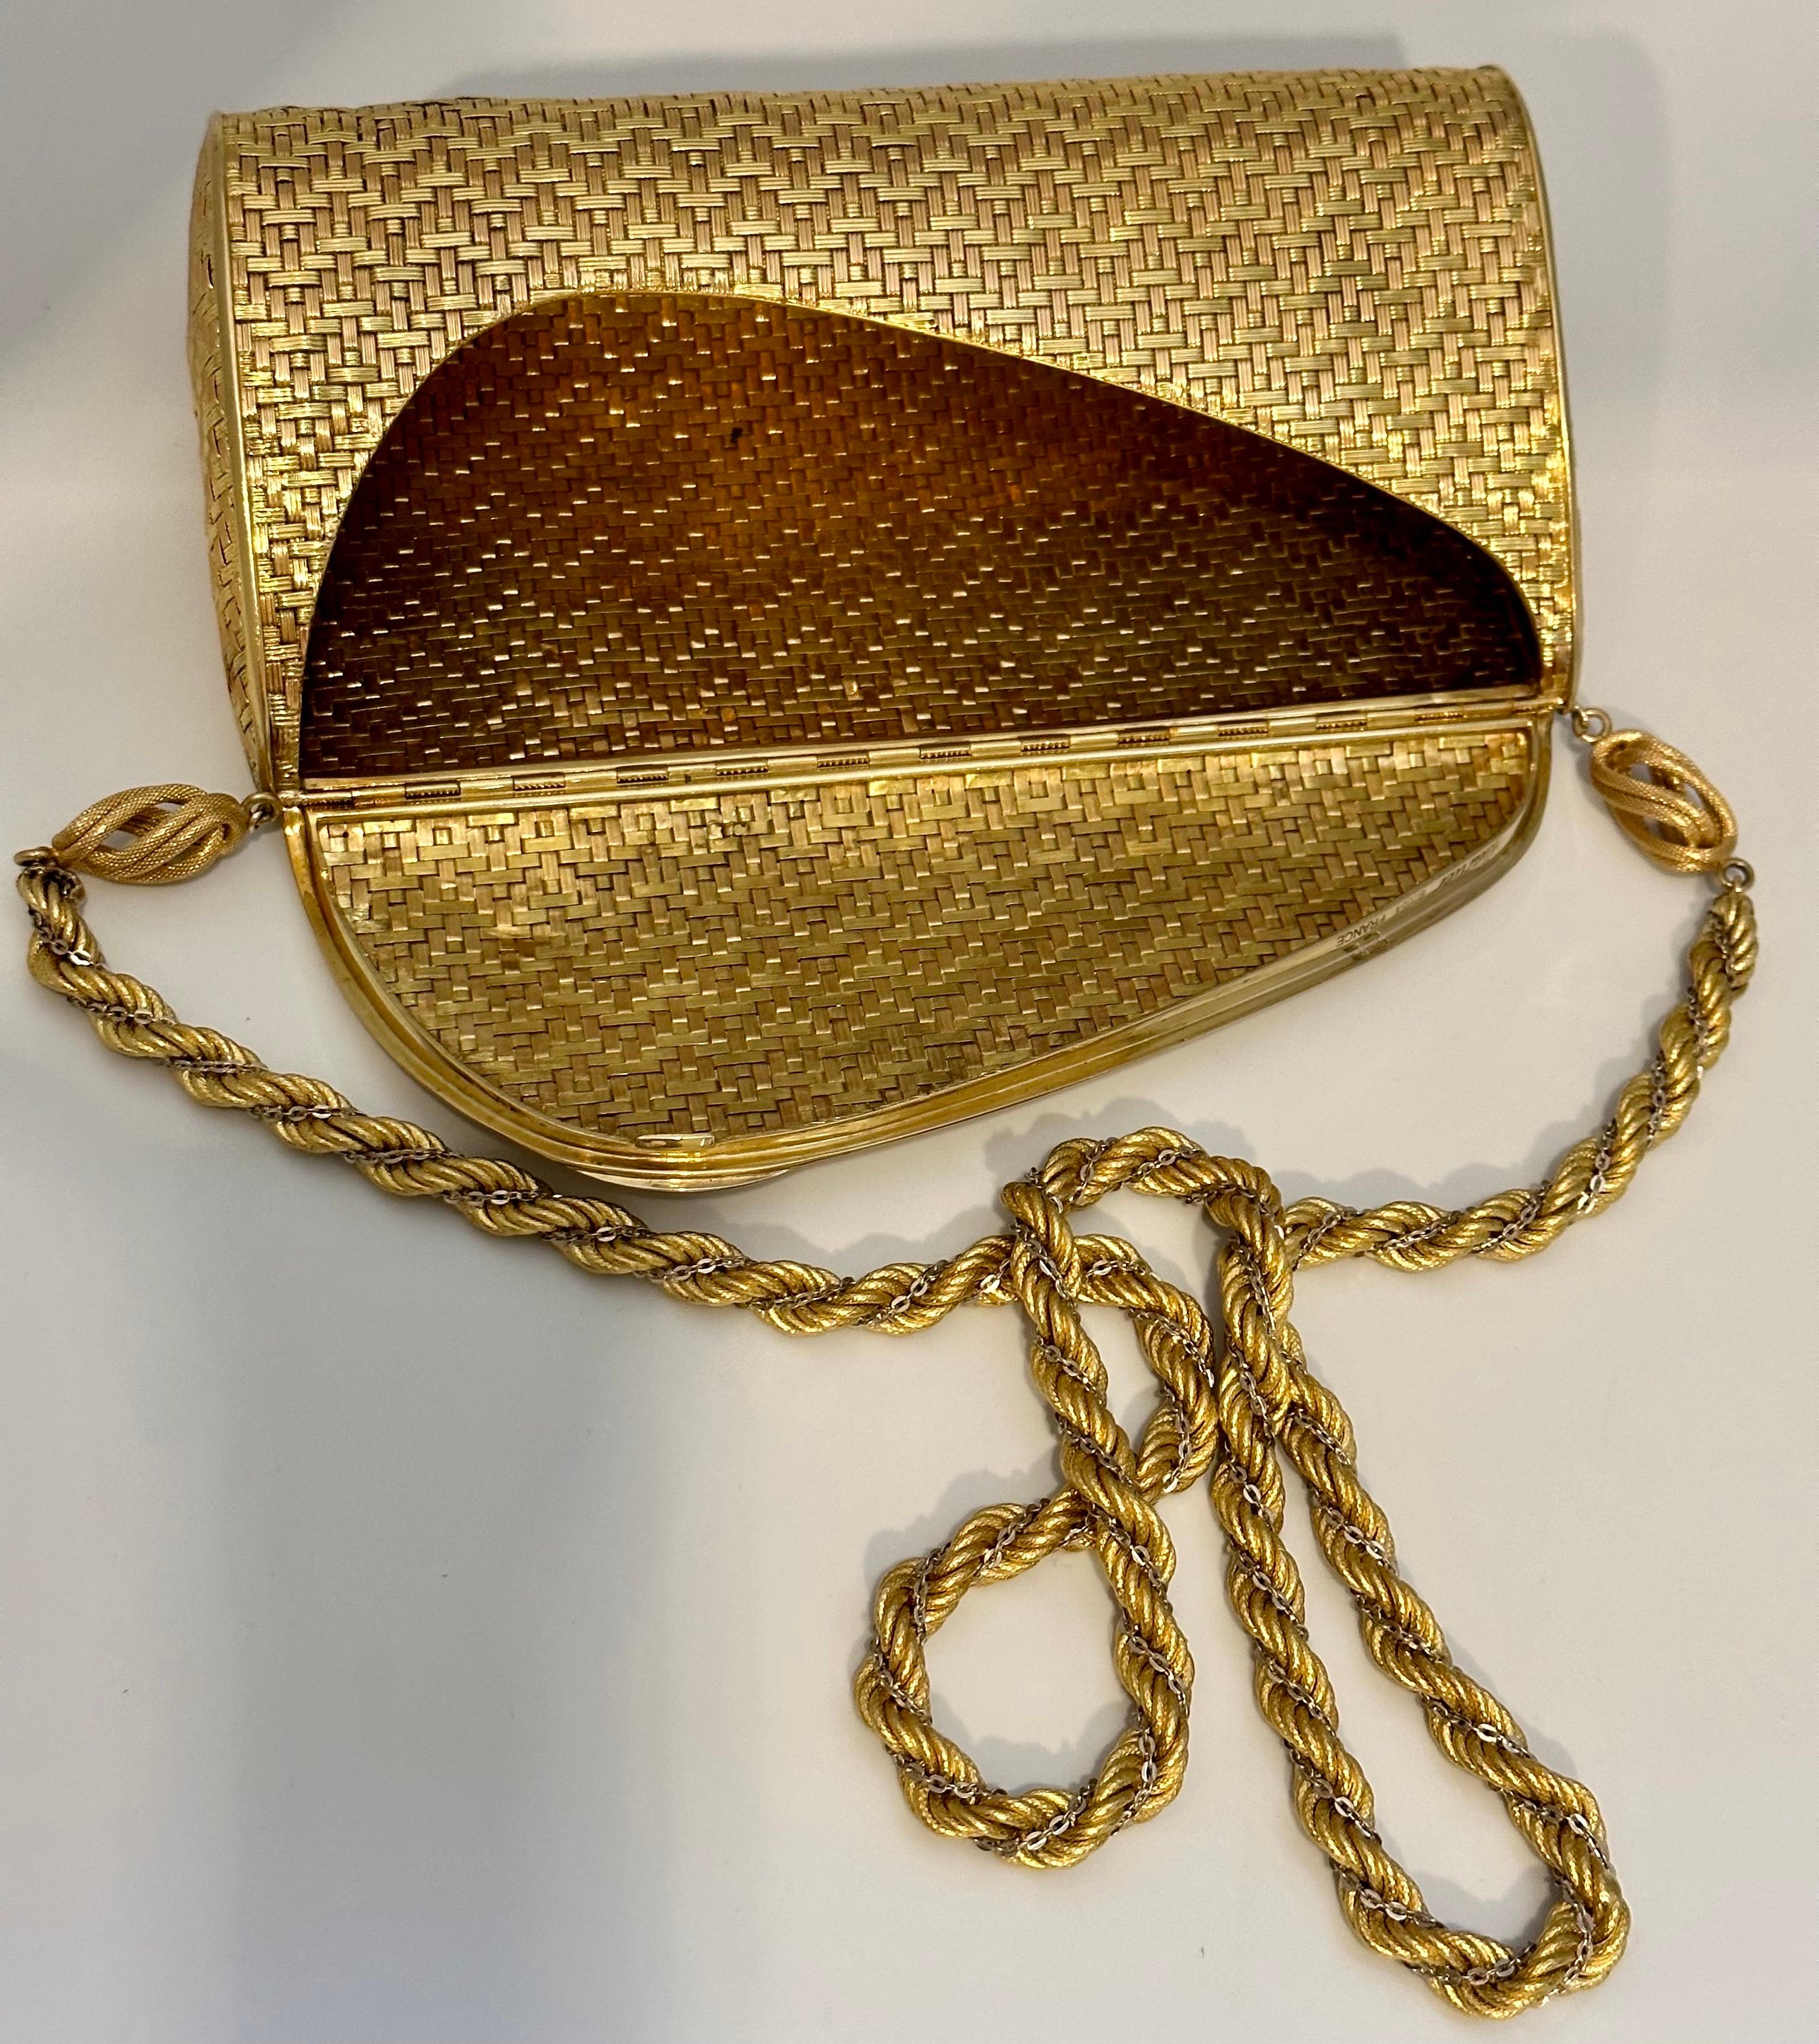 Cartier 18k Yellow Gold Mesh Purse Handbag with Shoulder Chain Rare 401 Gm For Sale 1